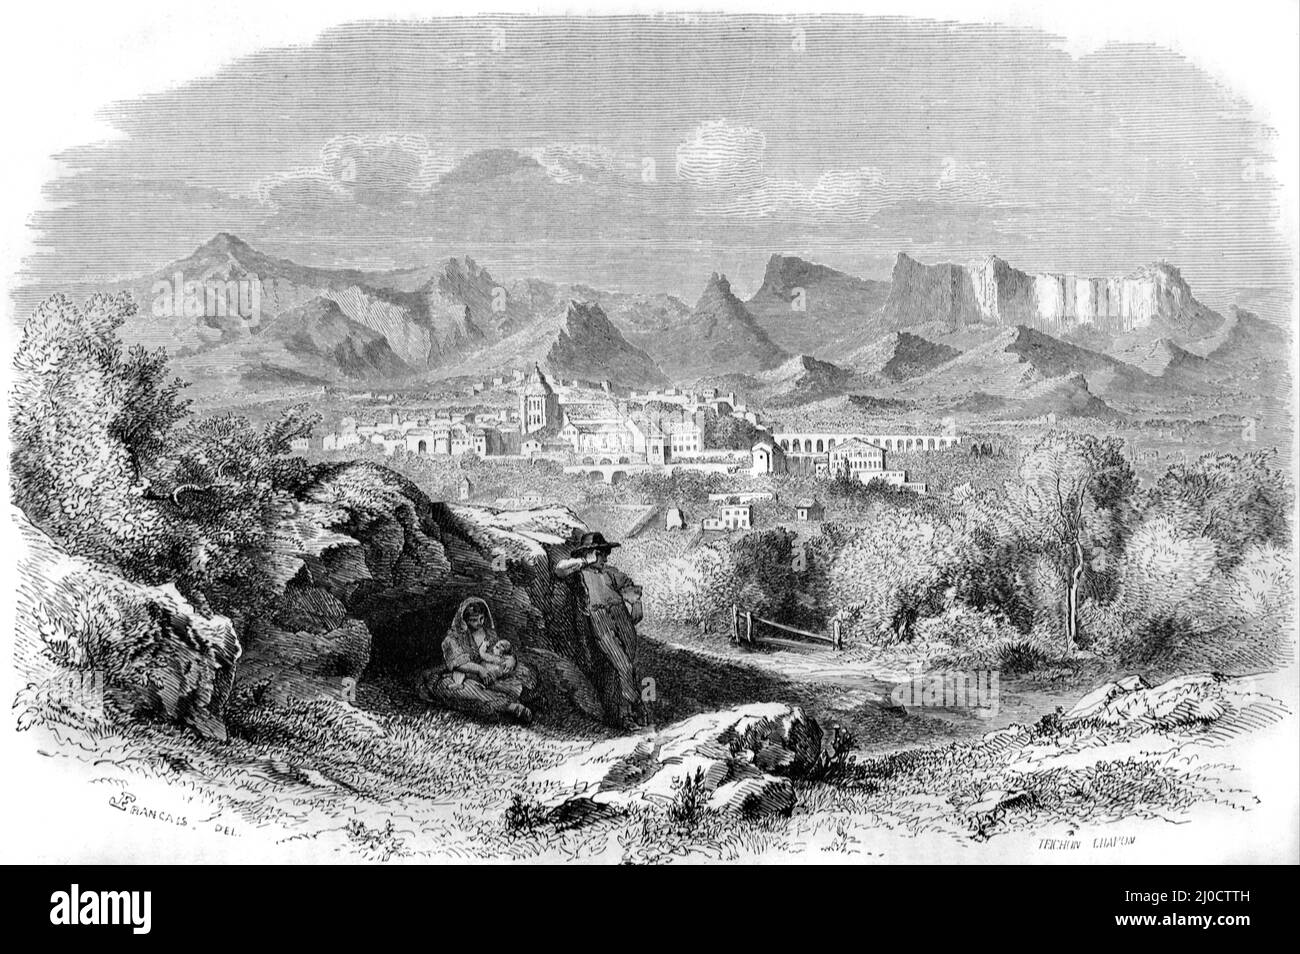 View of the Village of Die, the Roumeyer Valley and the Glandasse Mountain (2041m) in the Vercors Massif or Vercors Regional Park Drôme France. Vintage Illustration or Engraving 1860. Stock Photo